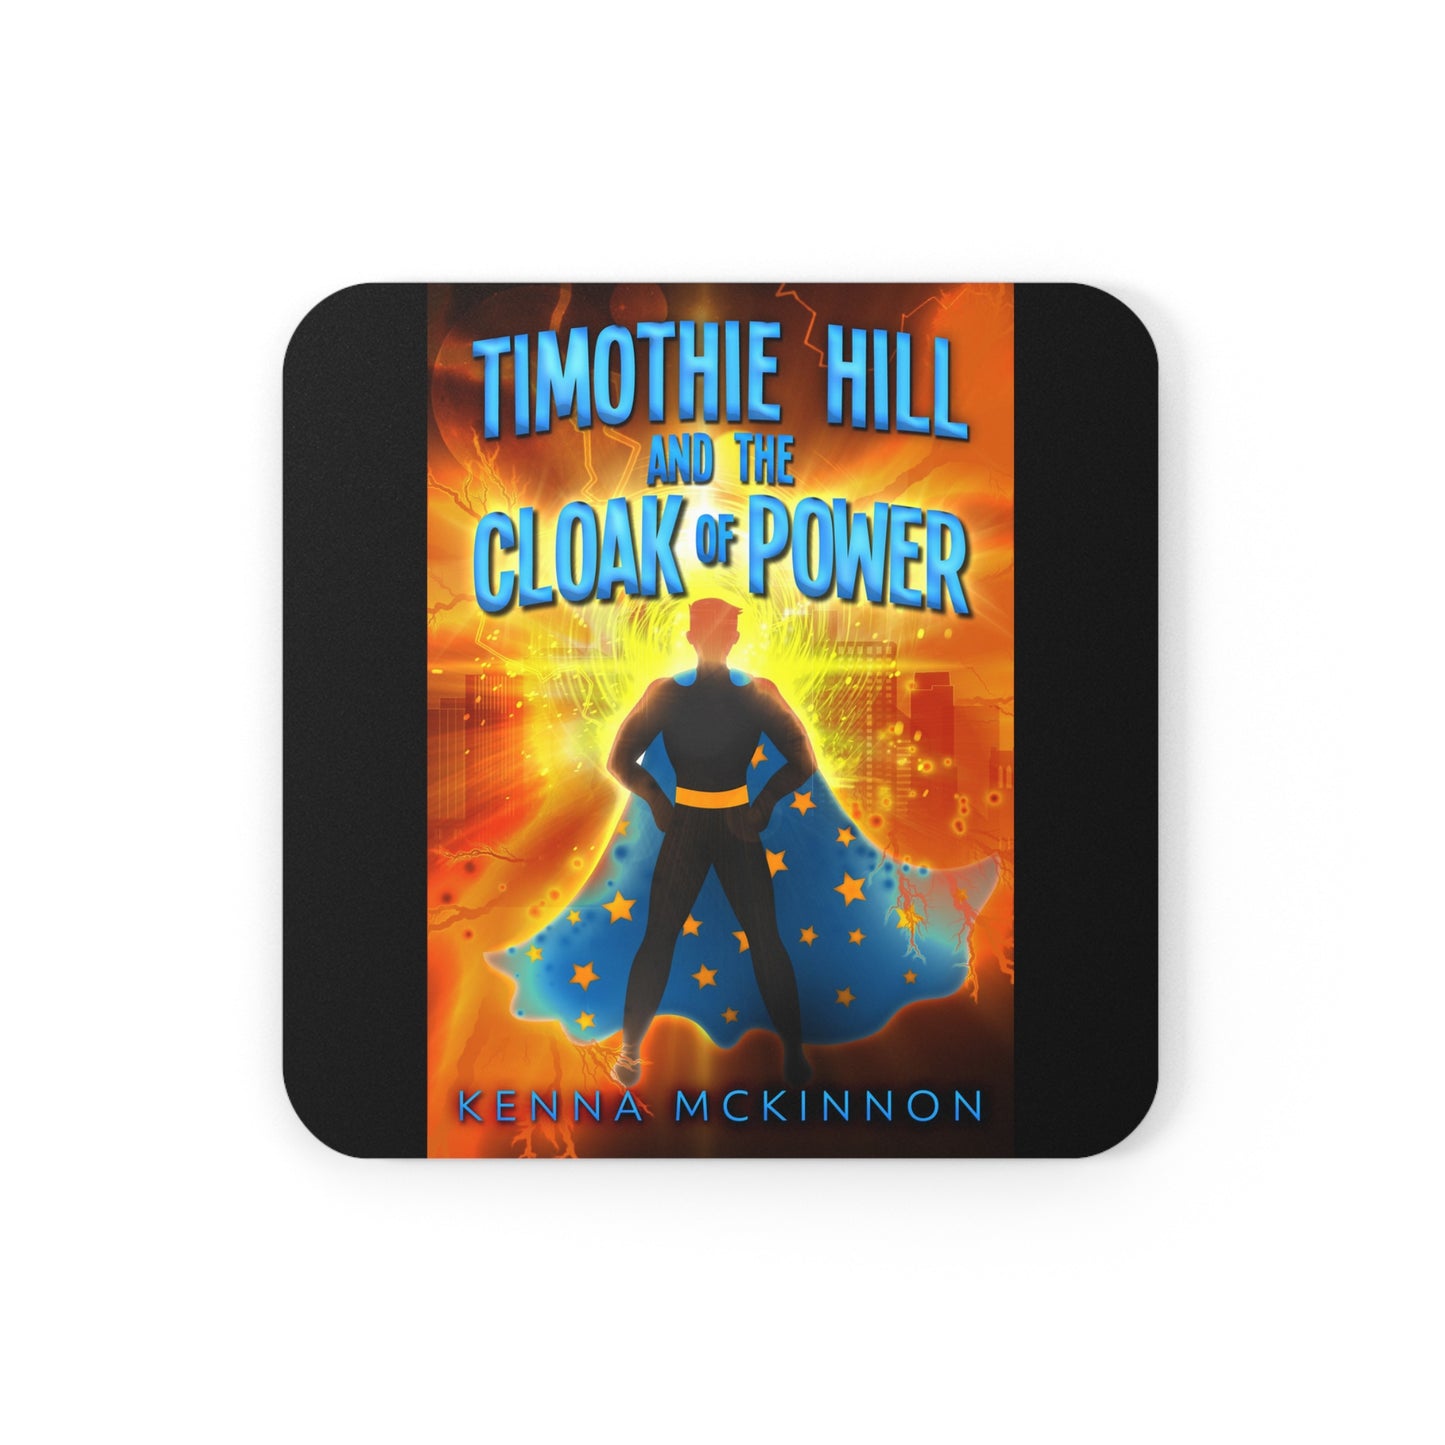 Timothie Hill and the Cloak of Power - Corkwood Coaster Set